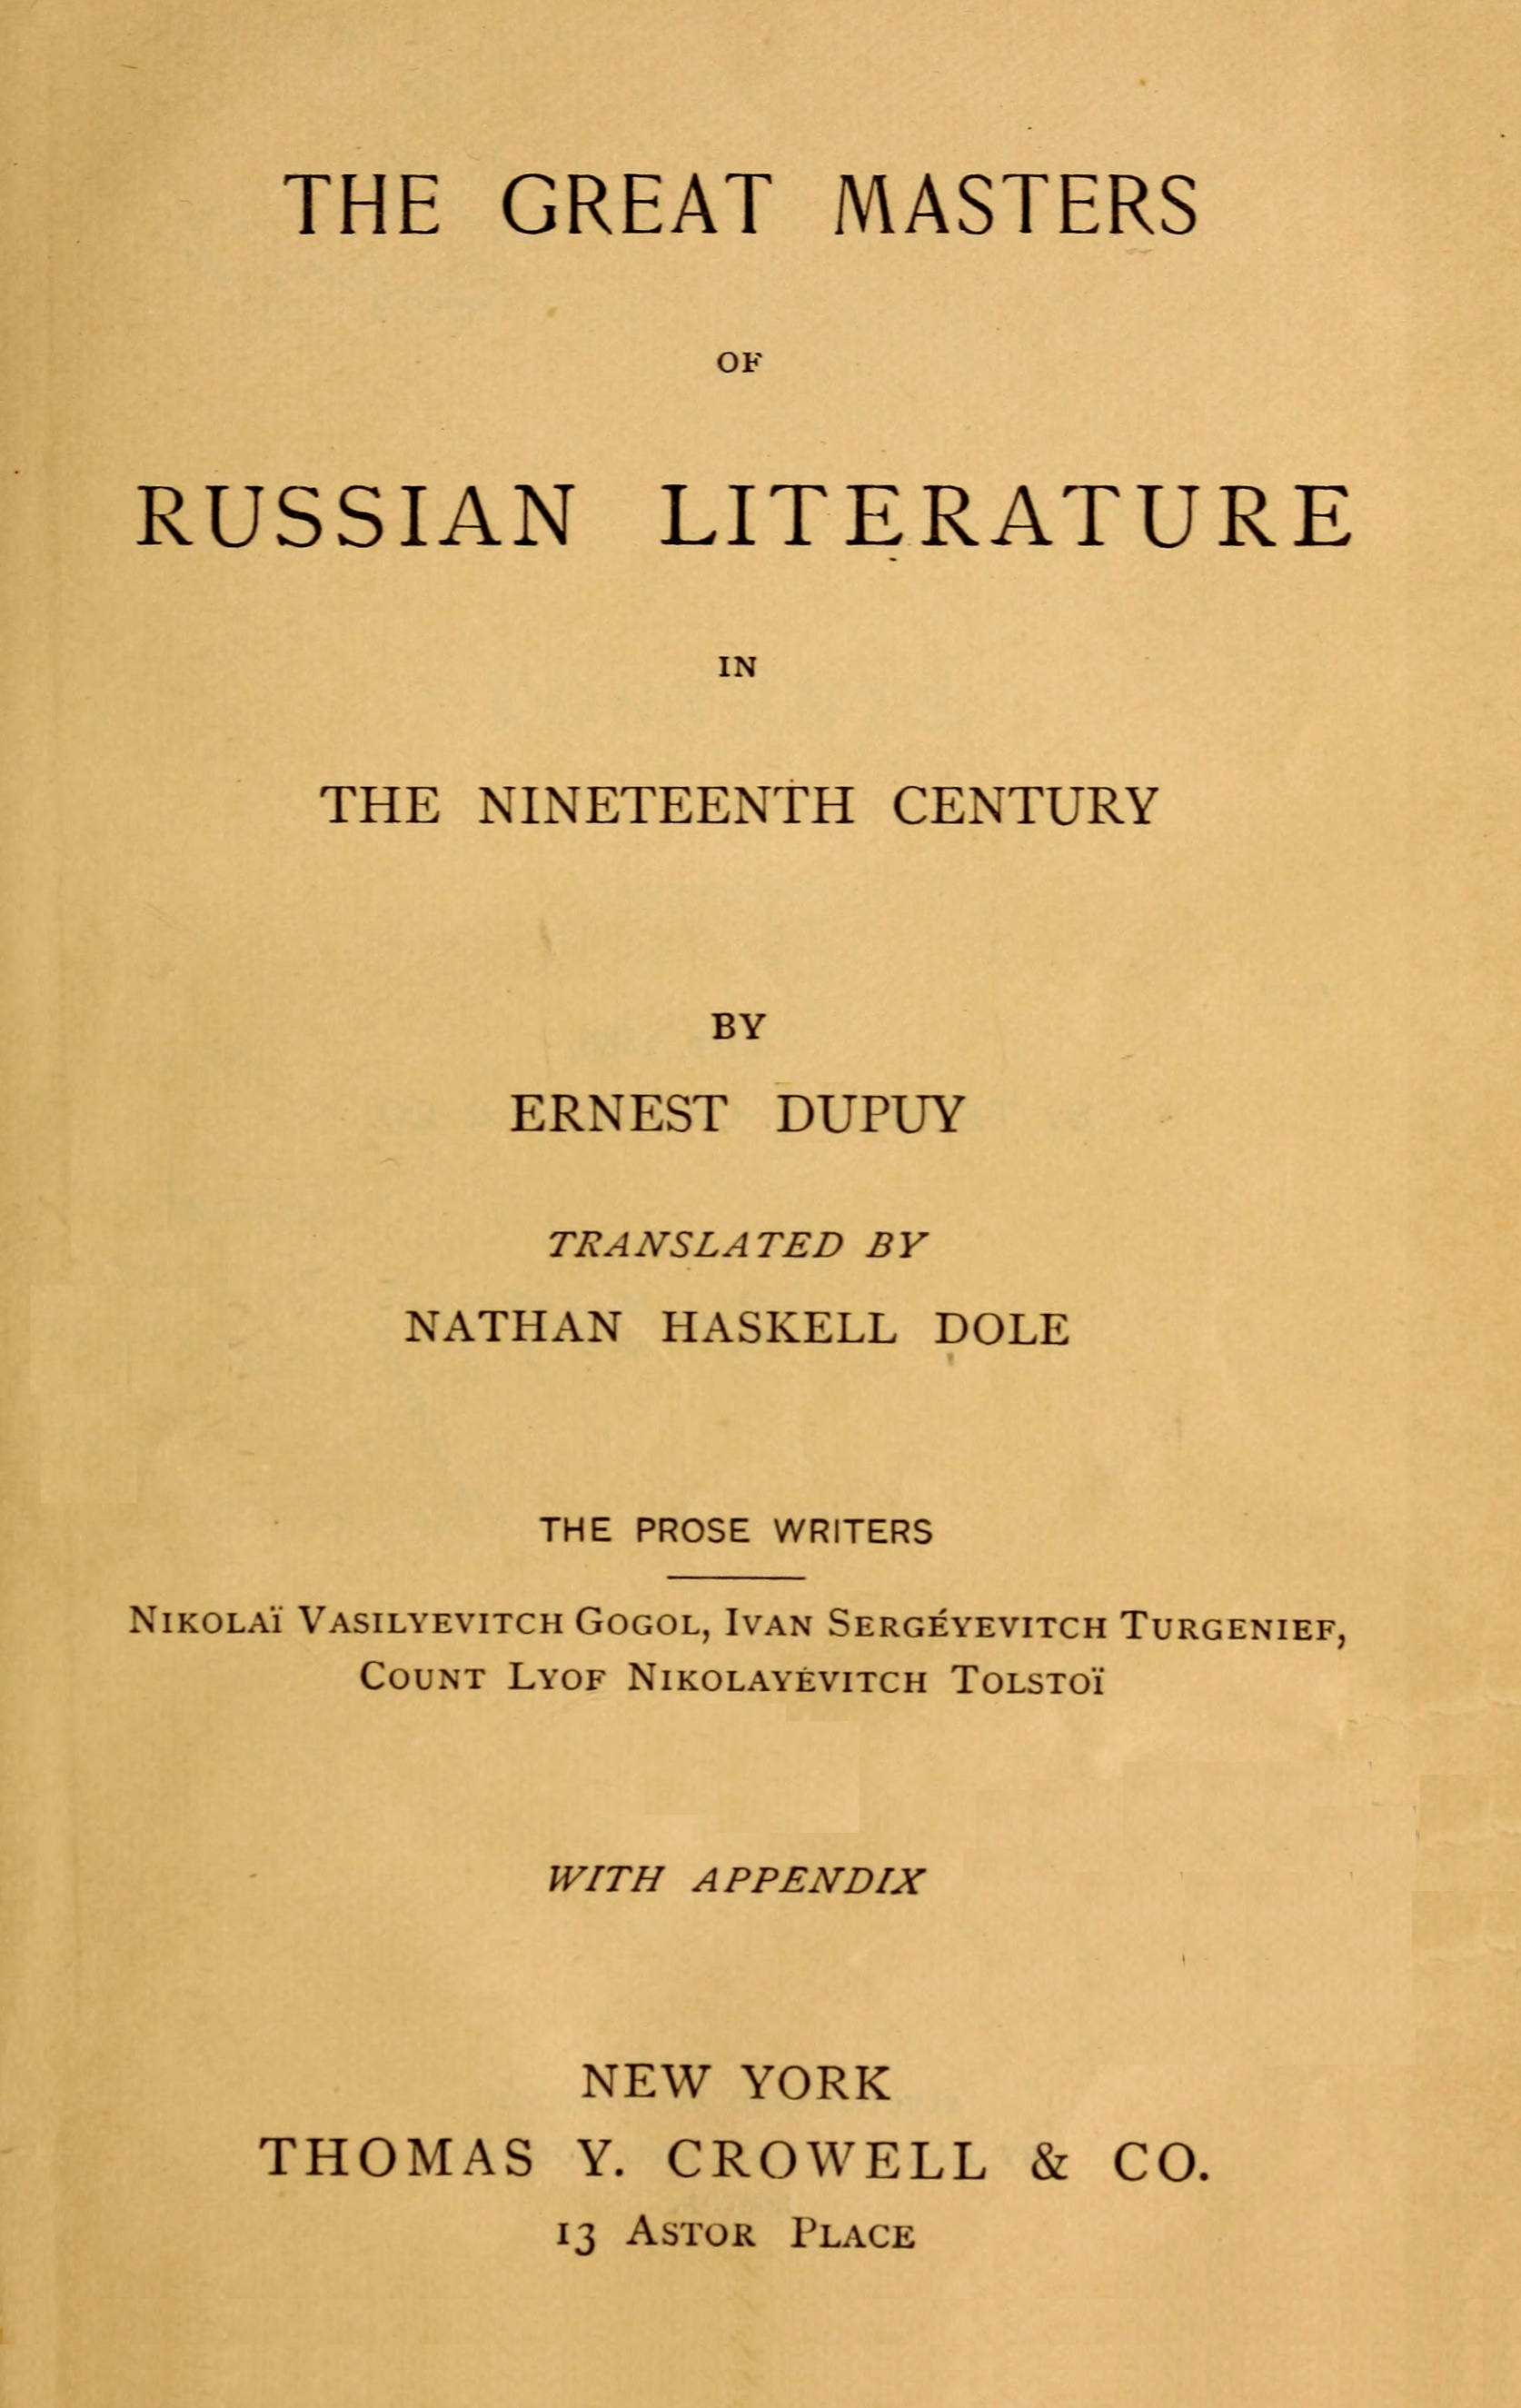 The great masters of Russian literature in the nineteenth century